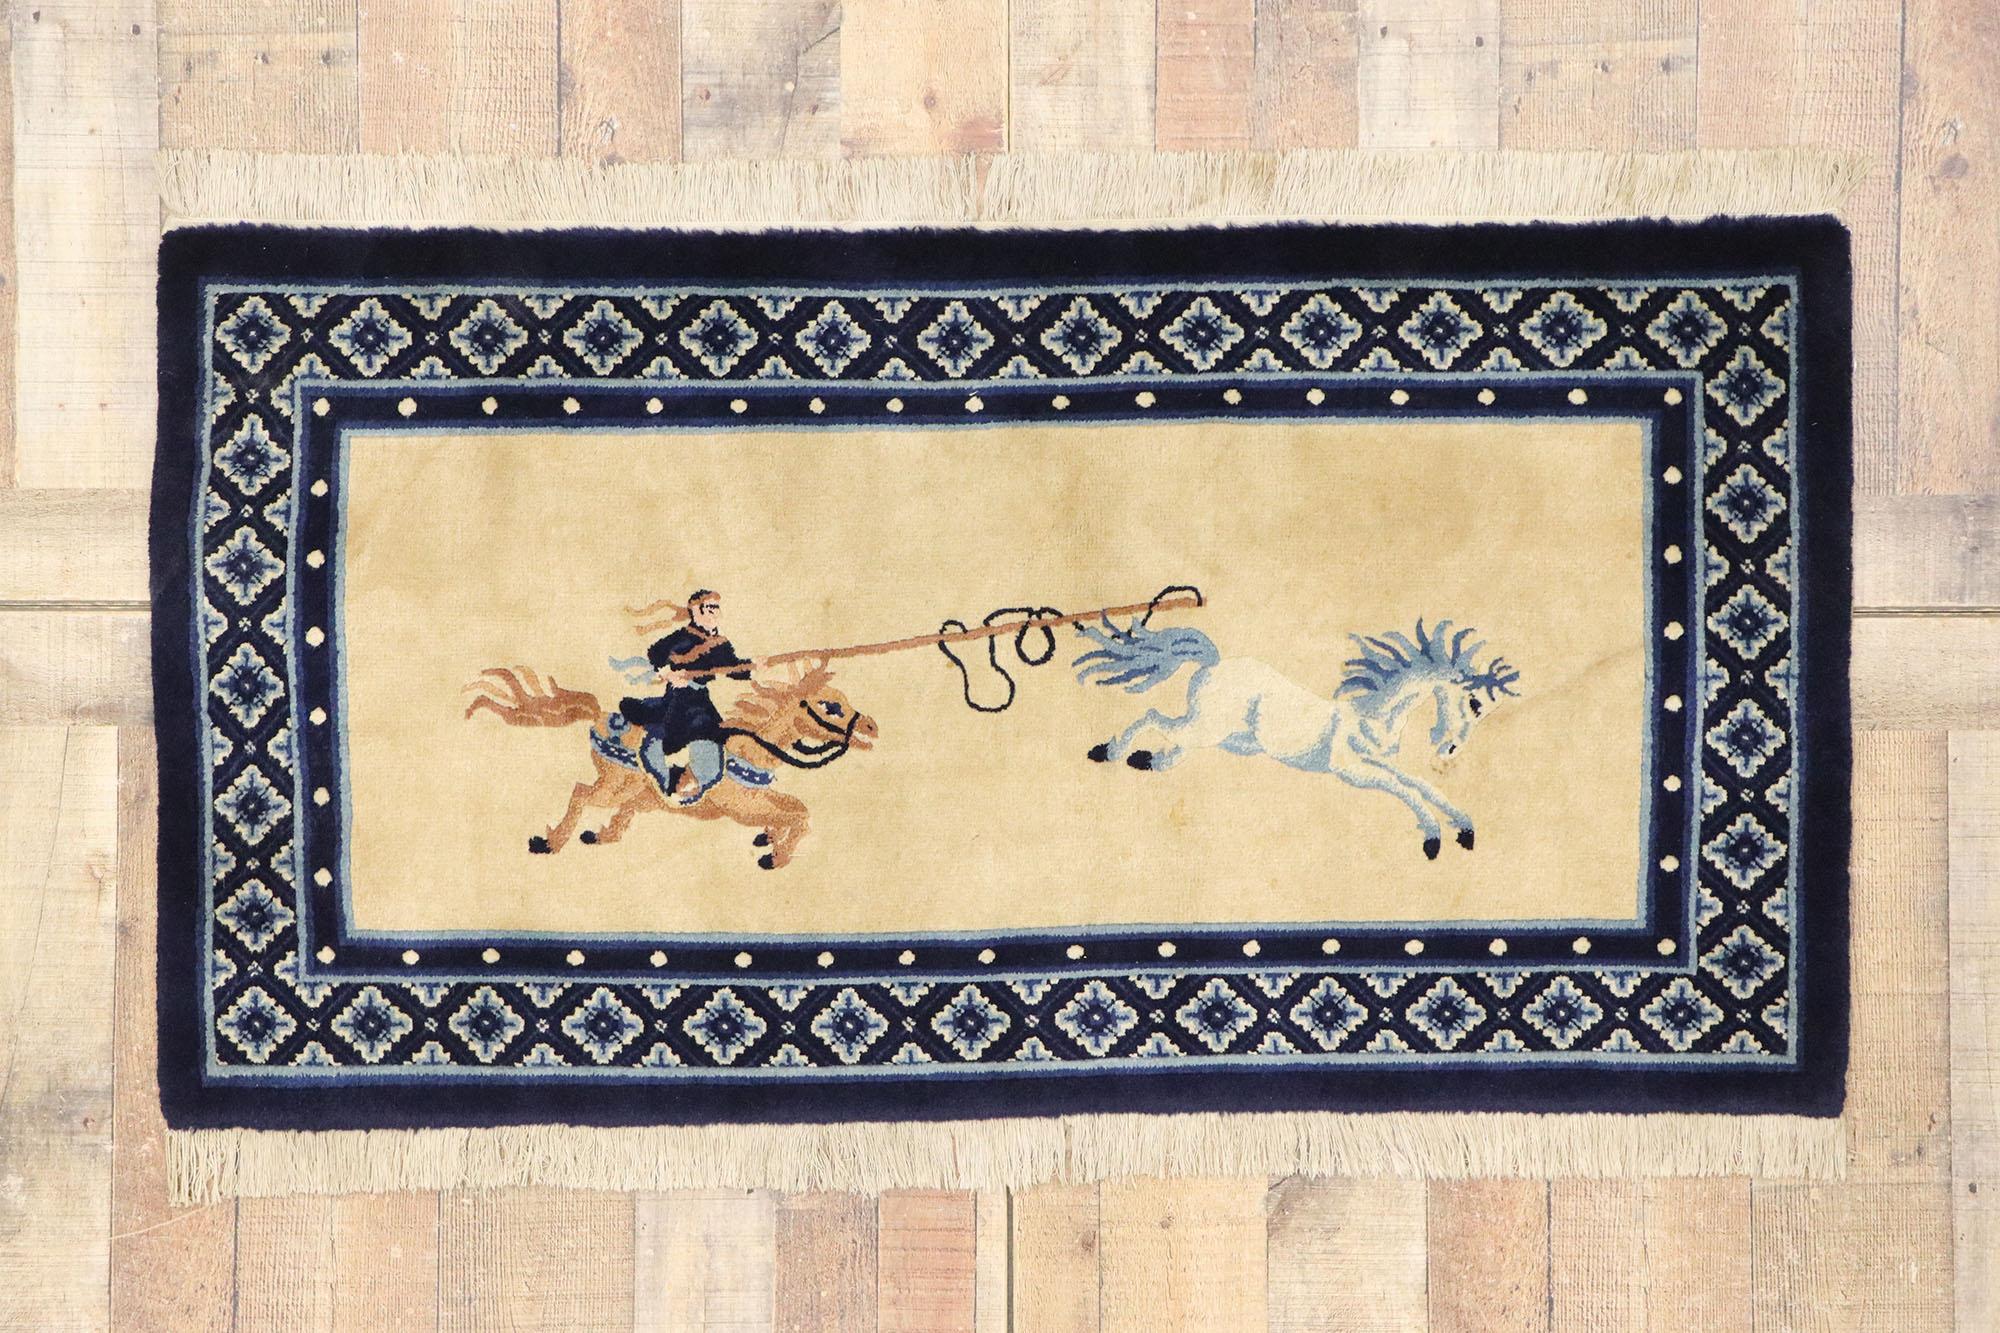 Wool Antique Chinese Art Deco Pictorial Rug with Samurai and Wild Horse For Sale